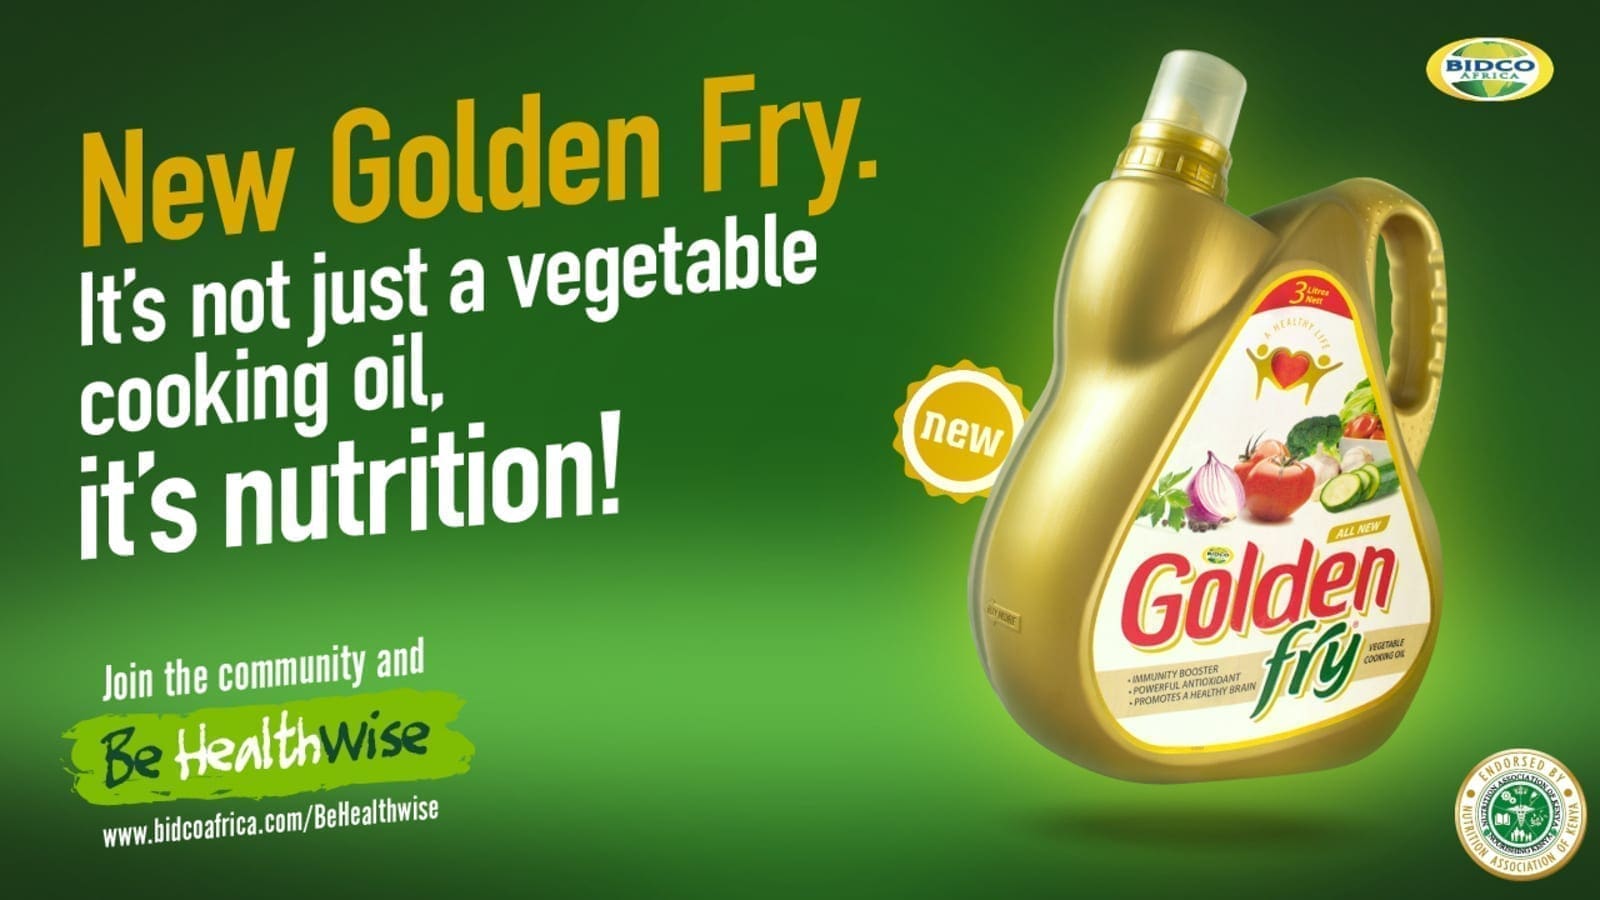 Bidco Africa promotes health living with new Golden Fry cooking oil